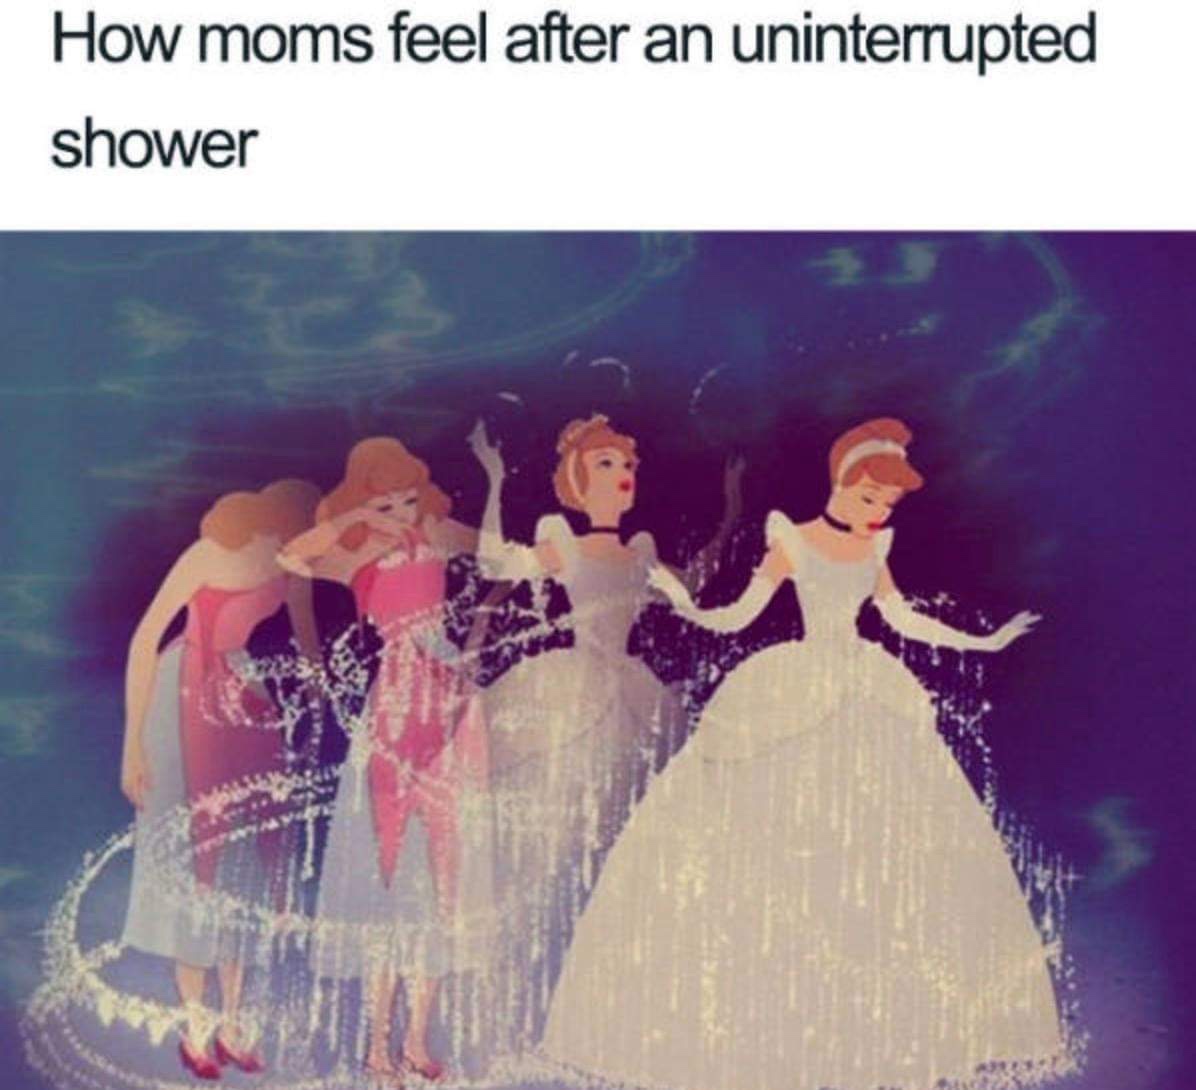 fairy godmother coffee meme - How moms feel after an uninterrupted shower